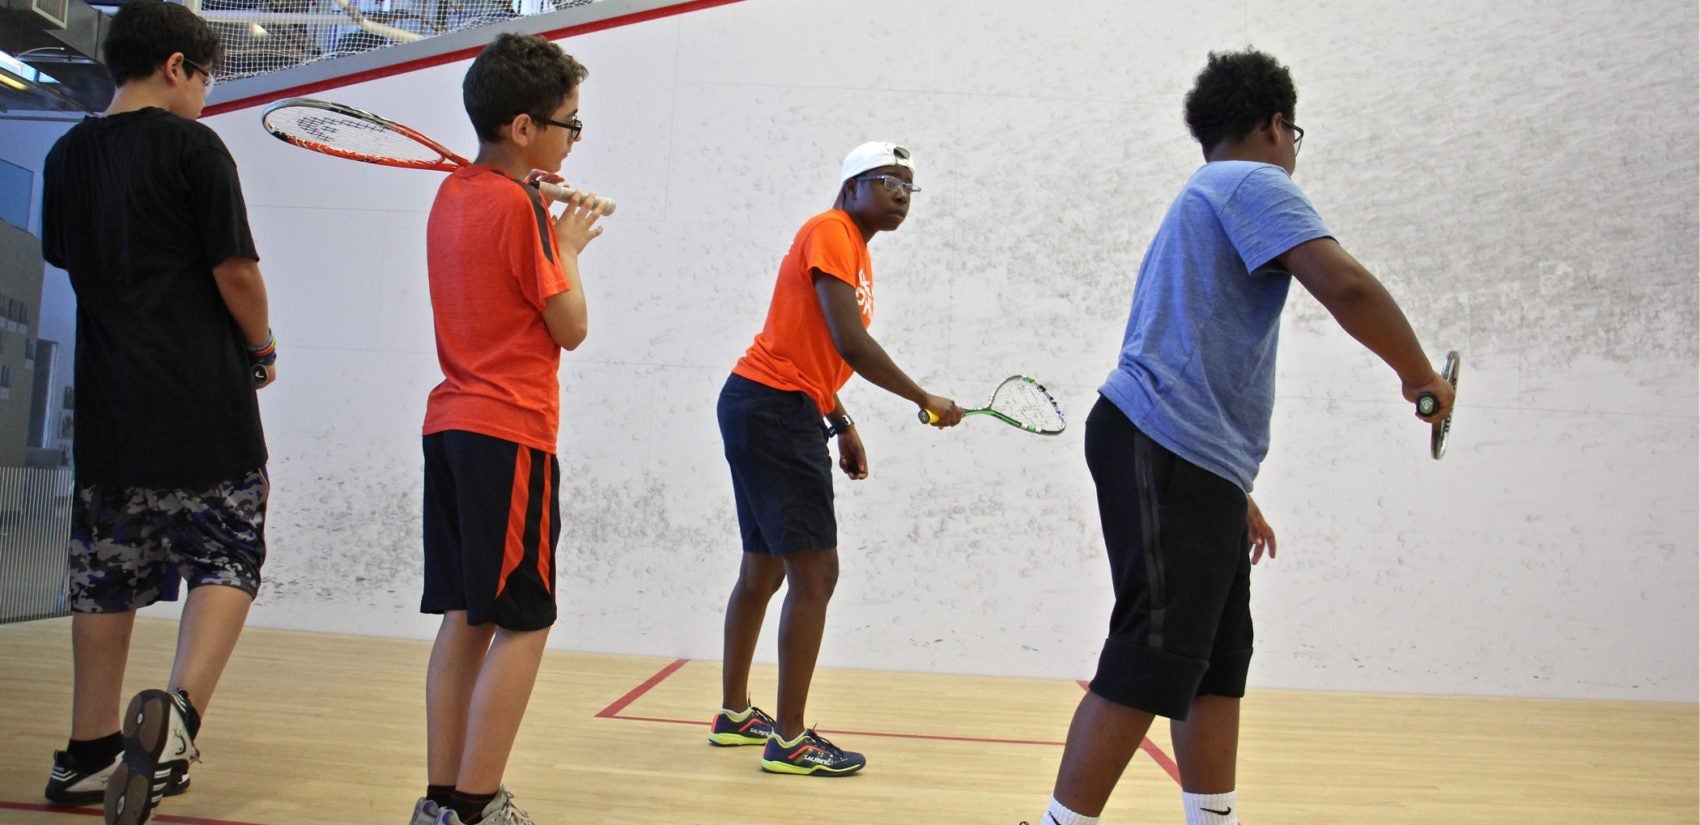 Squash coach Tempest Bowden runs drills with middle schoolers. (Emma Lee/WHYY)